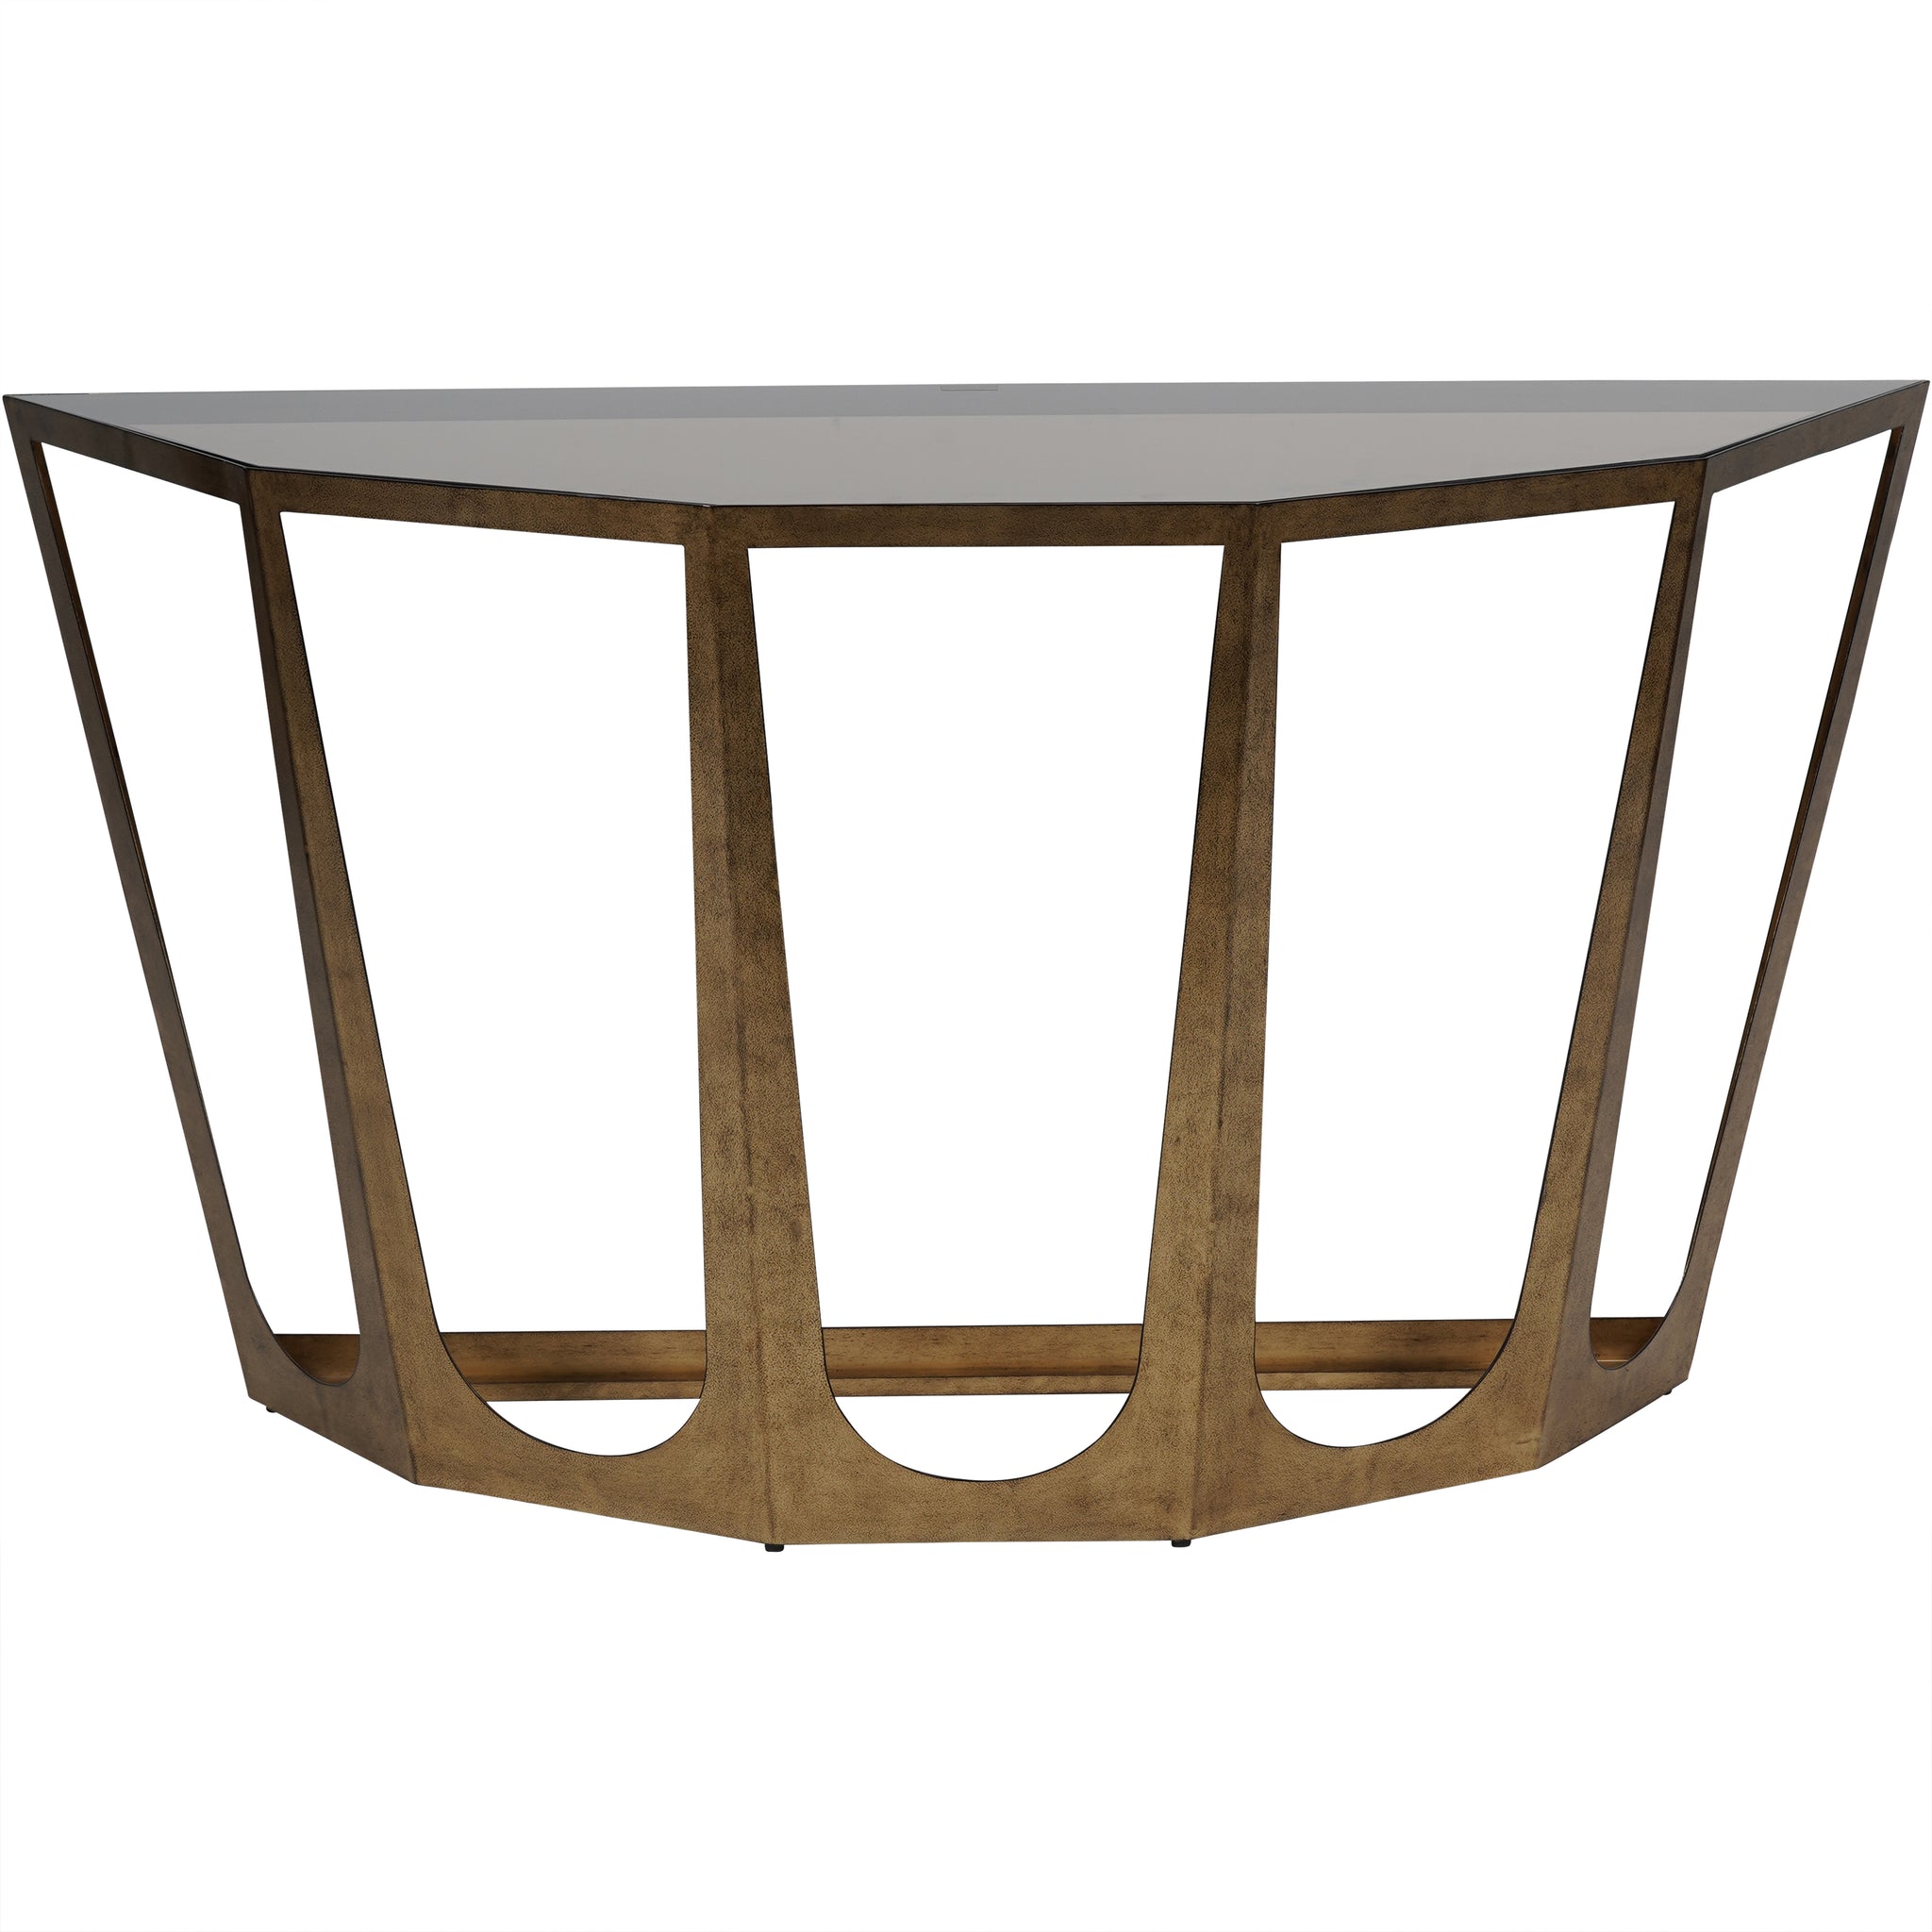 Rambla Champagne and smoked Glass console table